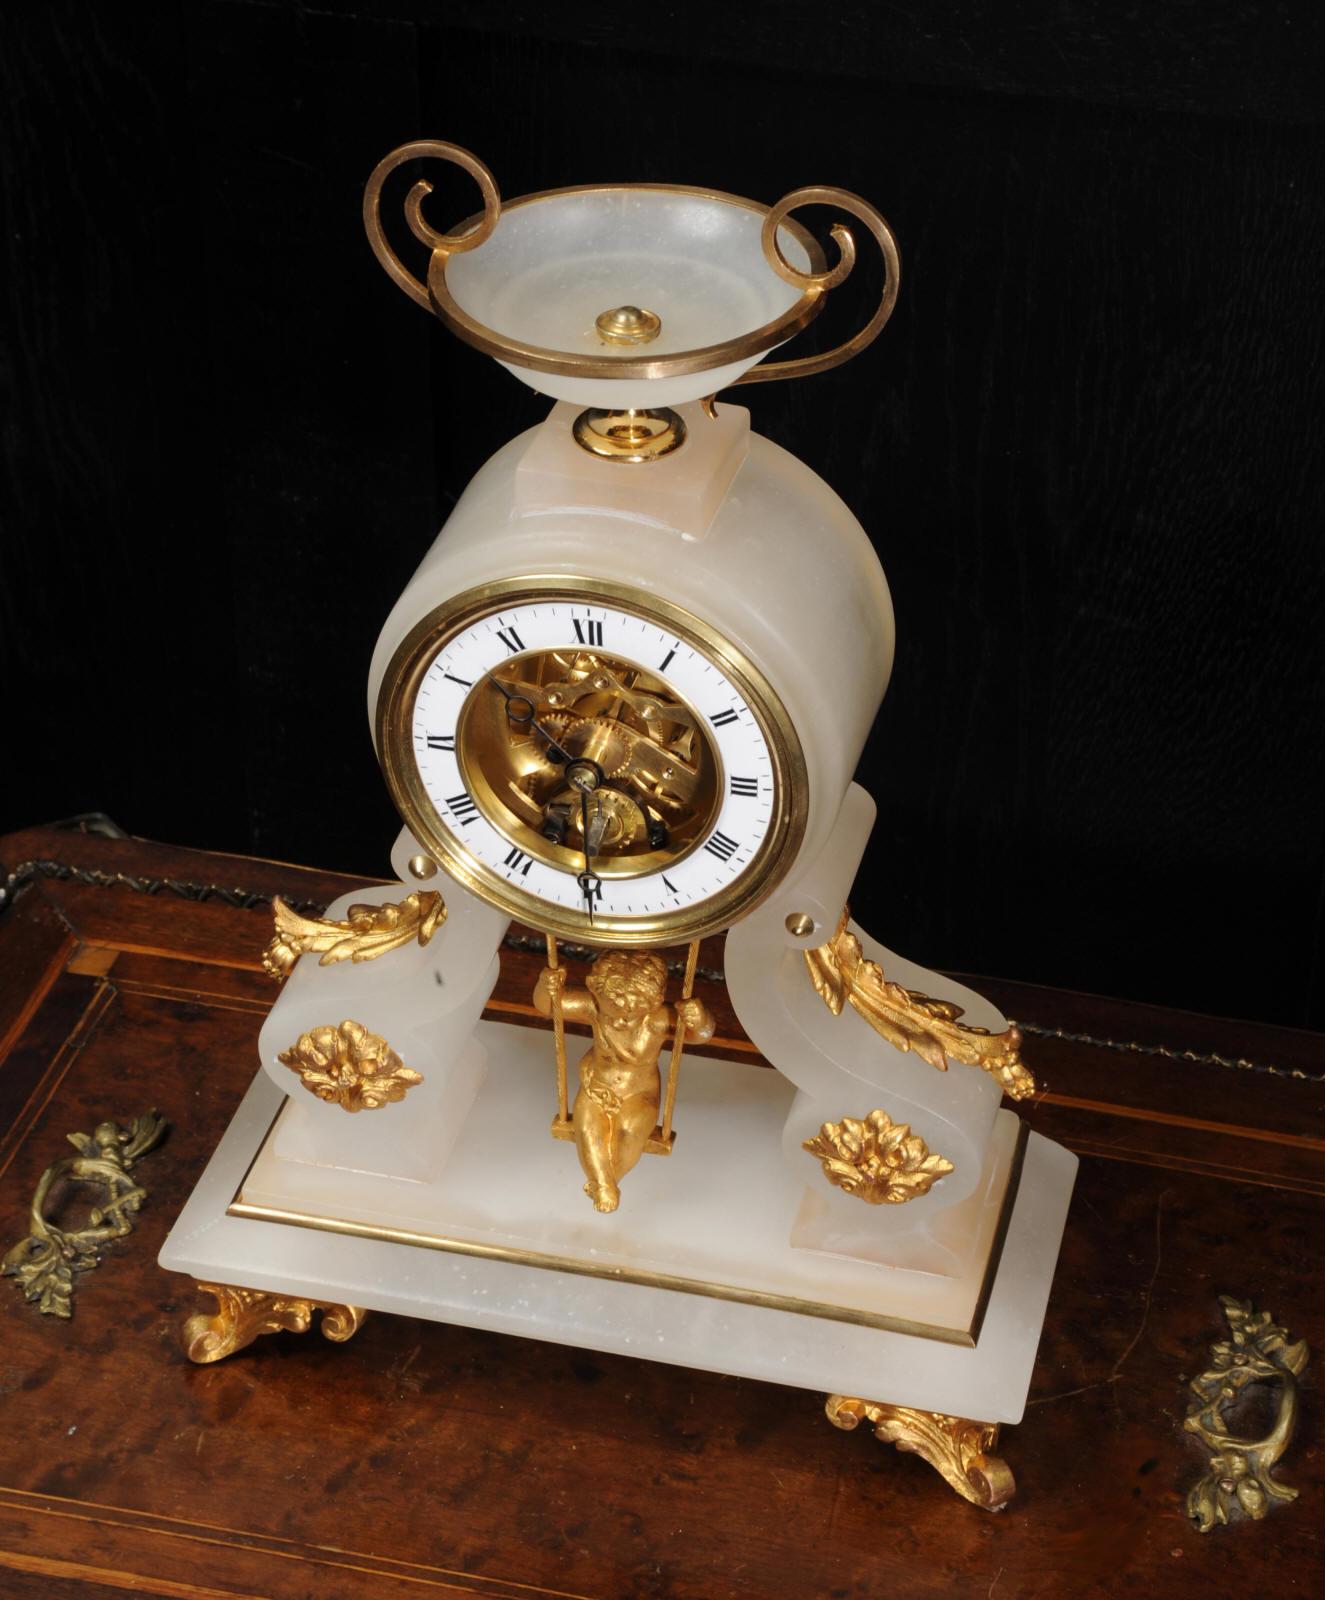 Ormolu Rare Cherub on a Swing Antique French Boudoir Clock with Visible Escapement